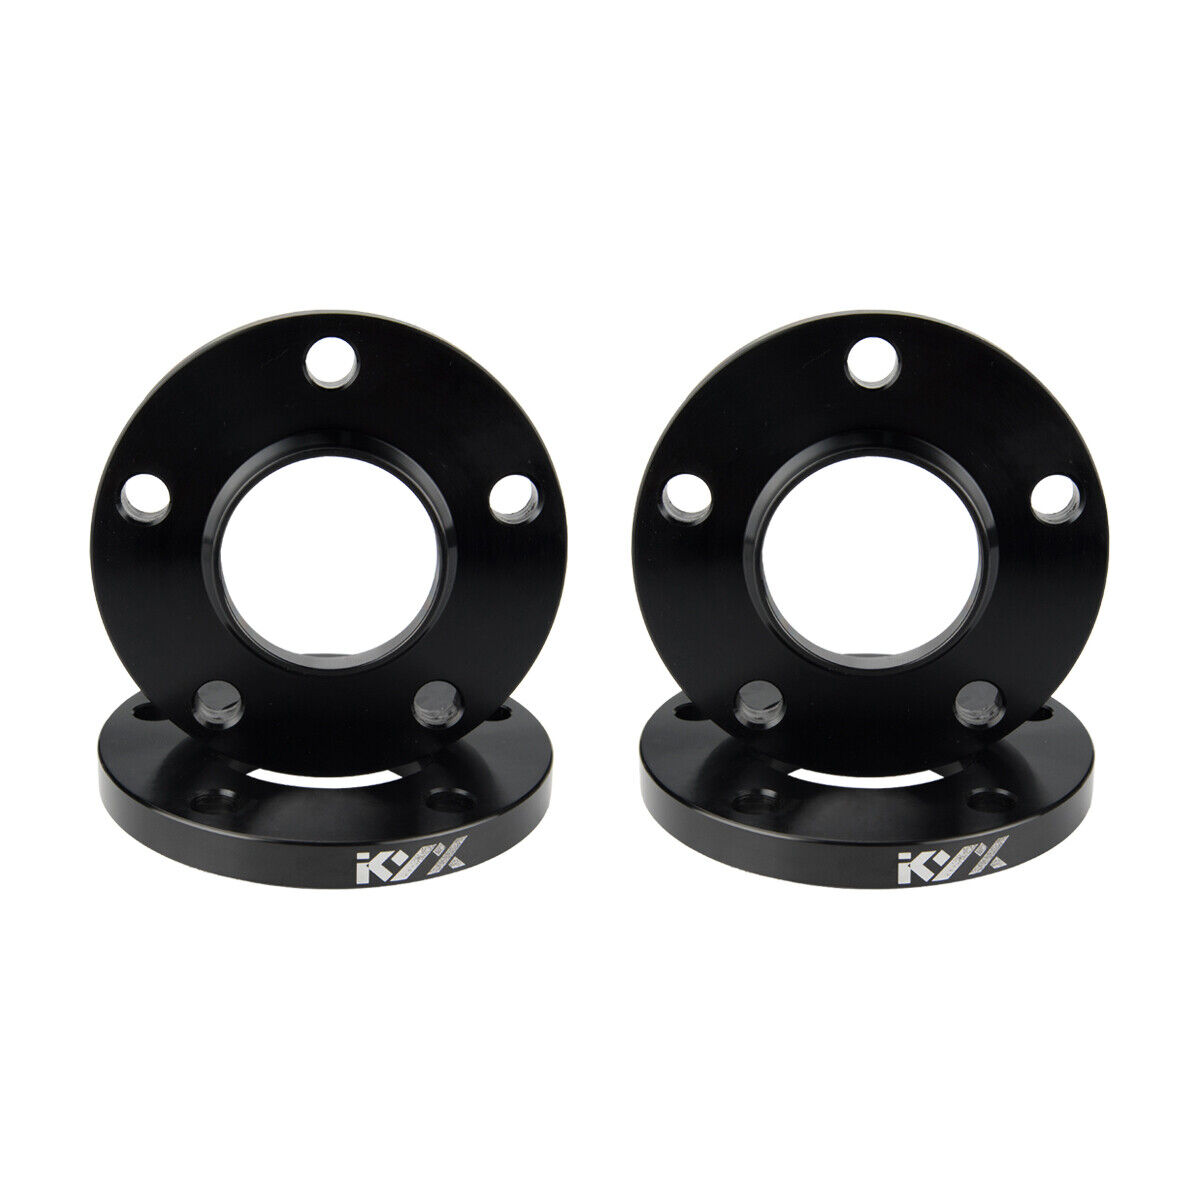 4pc 15mm 5x120mm Wheel Spacers Adapters Fits BMW 1 SERIES 116d,118d,120i,130i